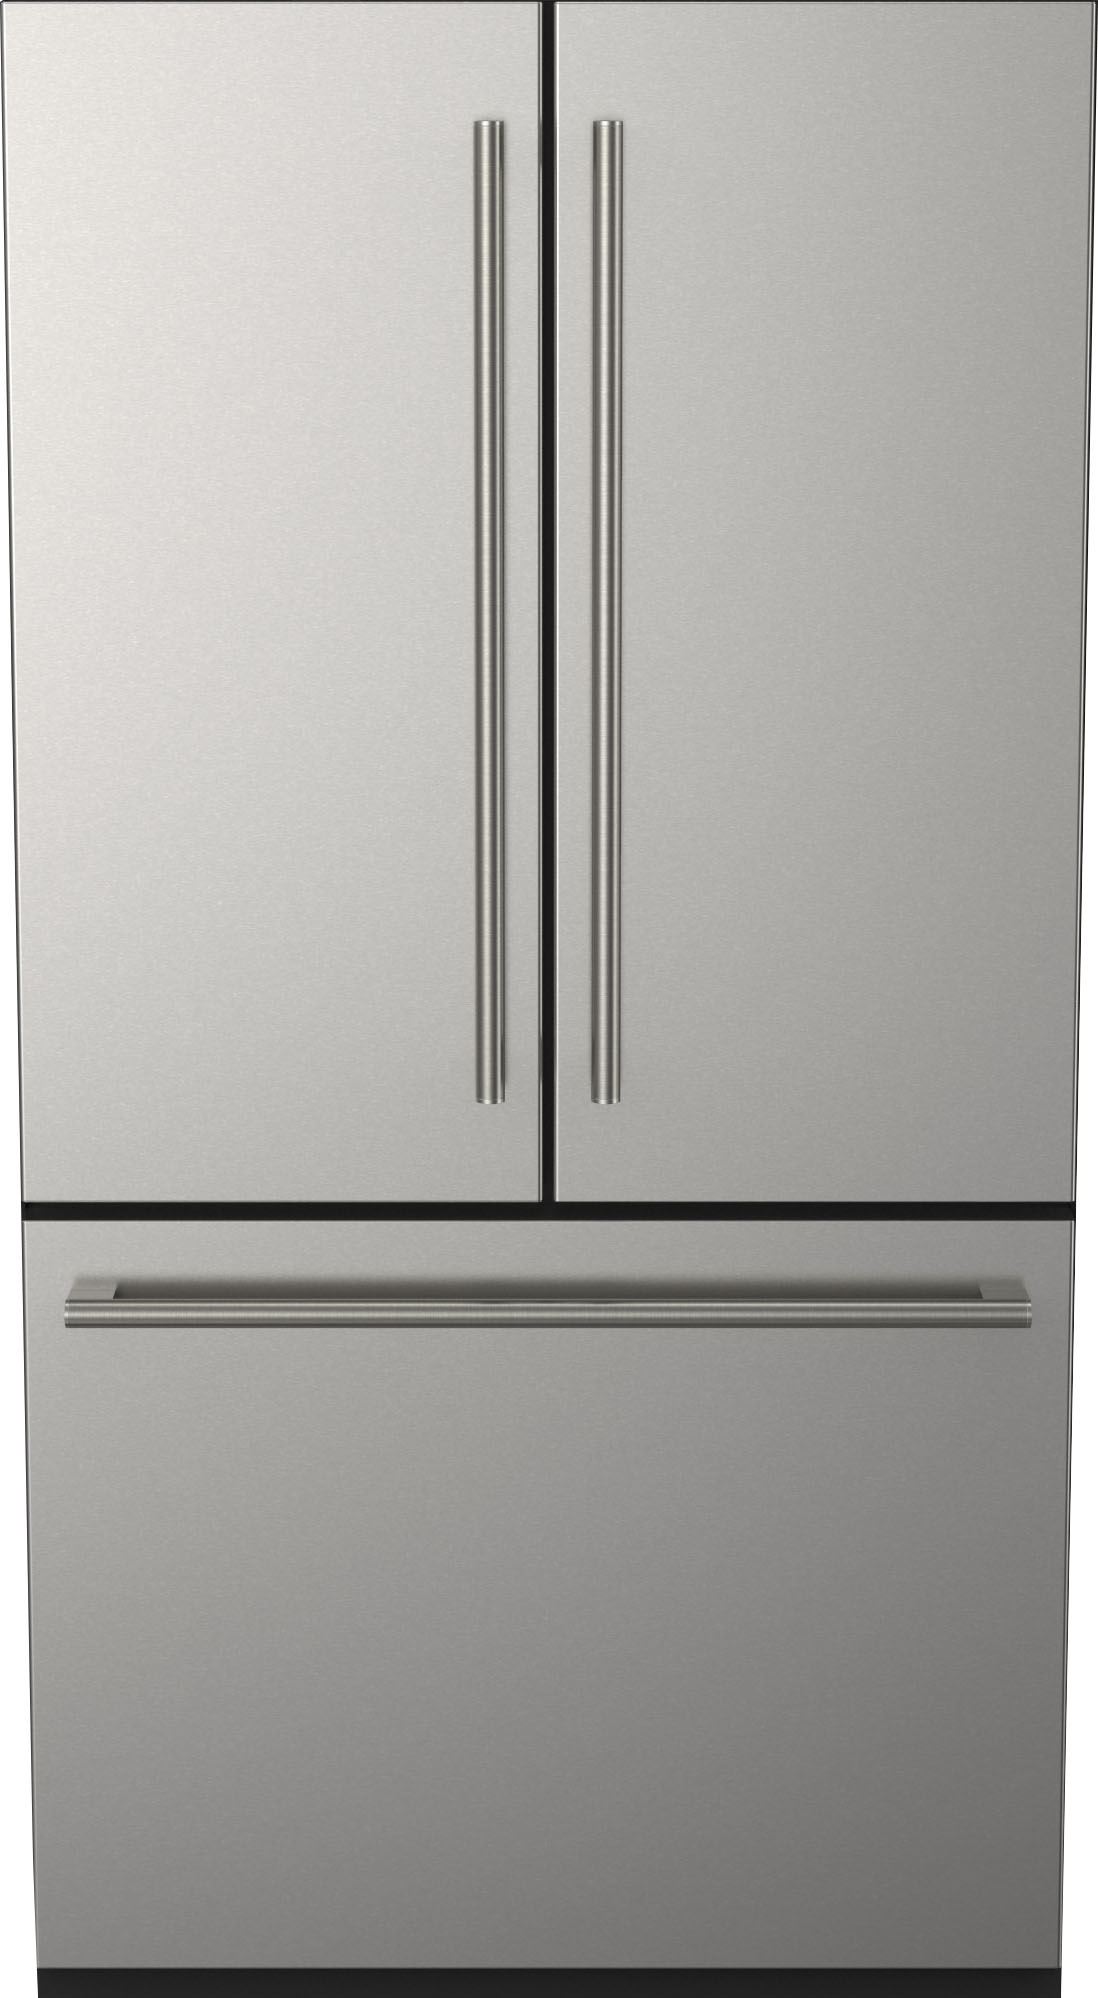 Fulgor Milano - Milano Stainless Steel French Door Refrigerator without Handle - Silver